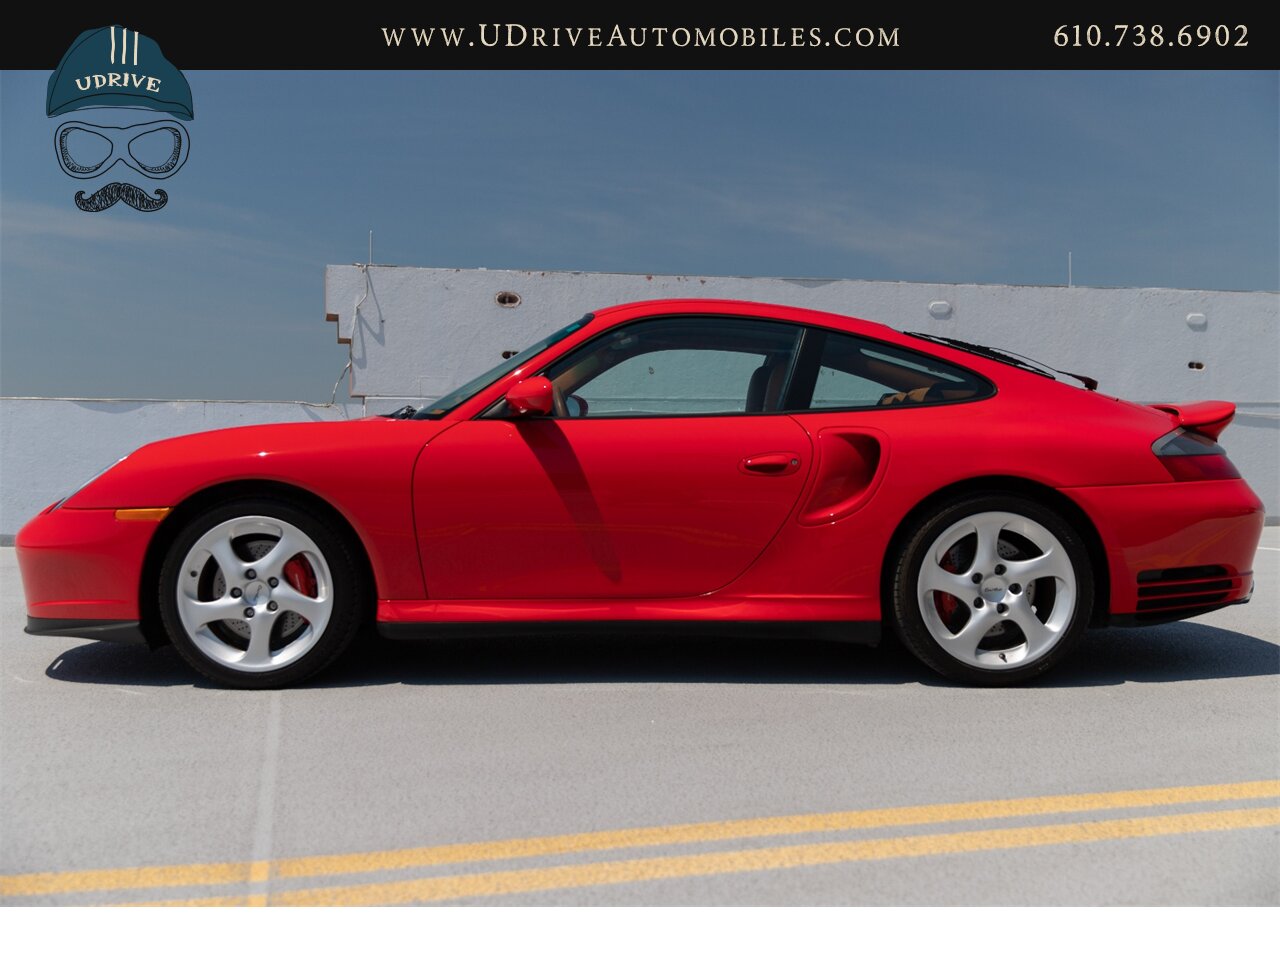 2003 Porsche 911 Turbo 996 Turbo X50 Power Kit 6 Speed Manual  Rare Color Guards Red over Brown Natural Leather - Photo 9 - West Chester, PA 19382